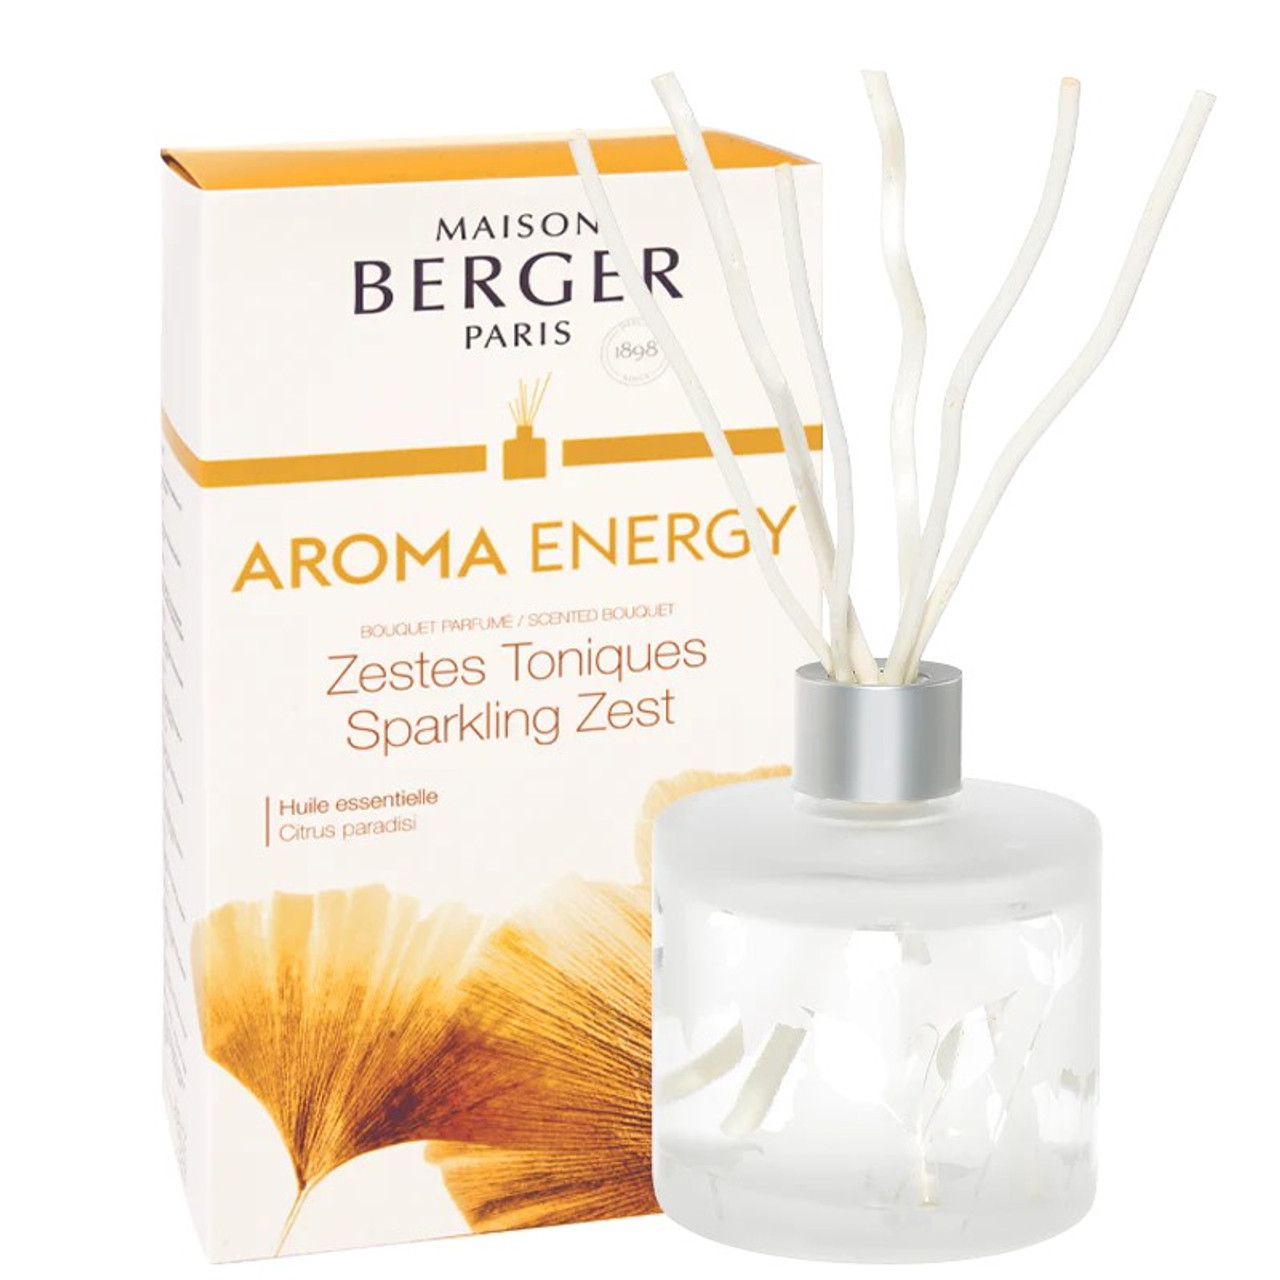 Aroma Energy Reed Diffuser Pre-filled with Sparkling Zest